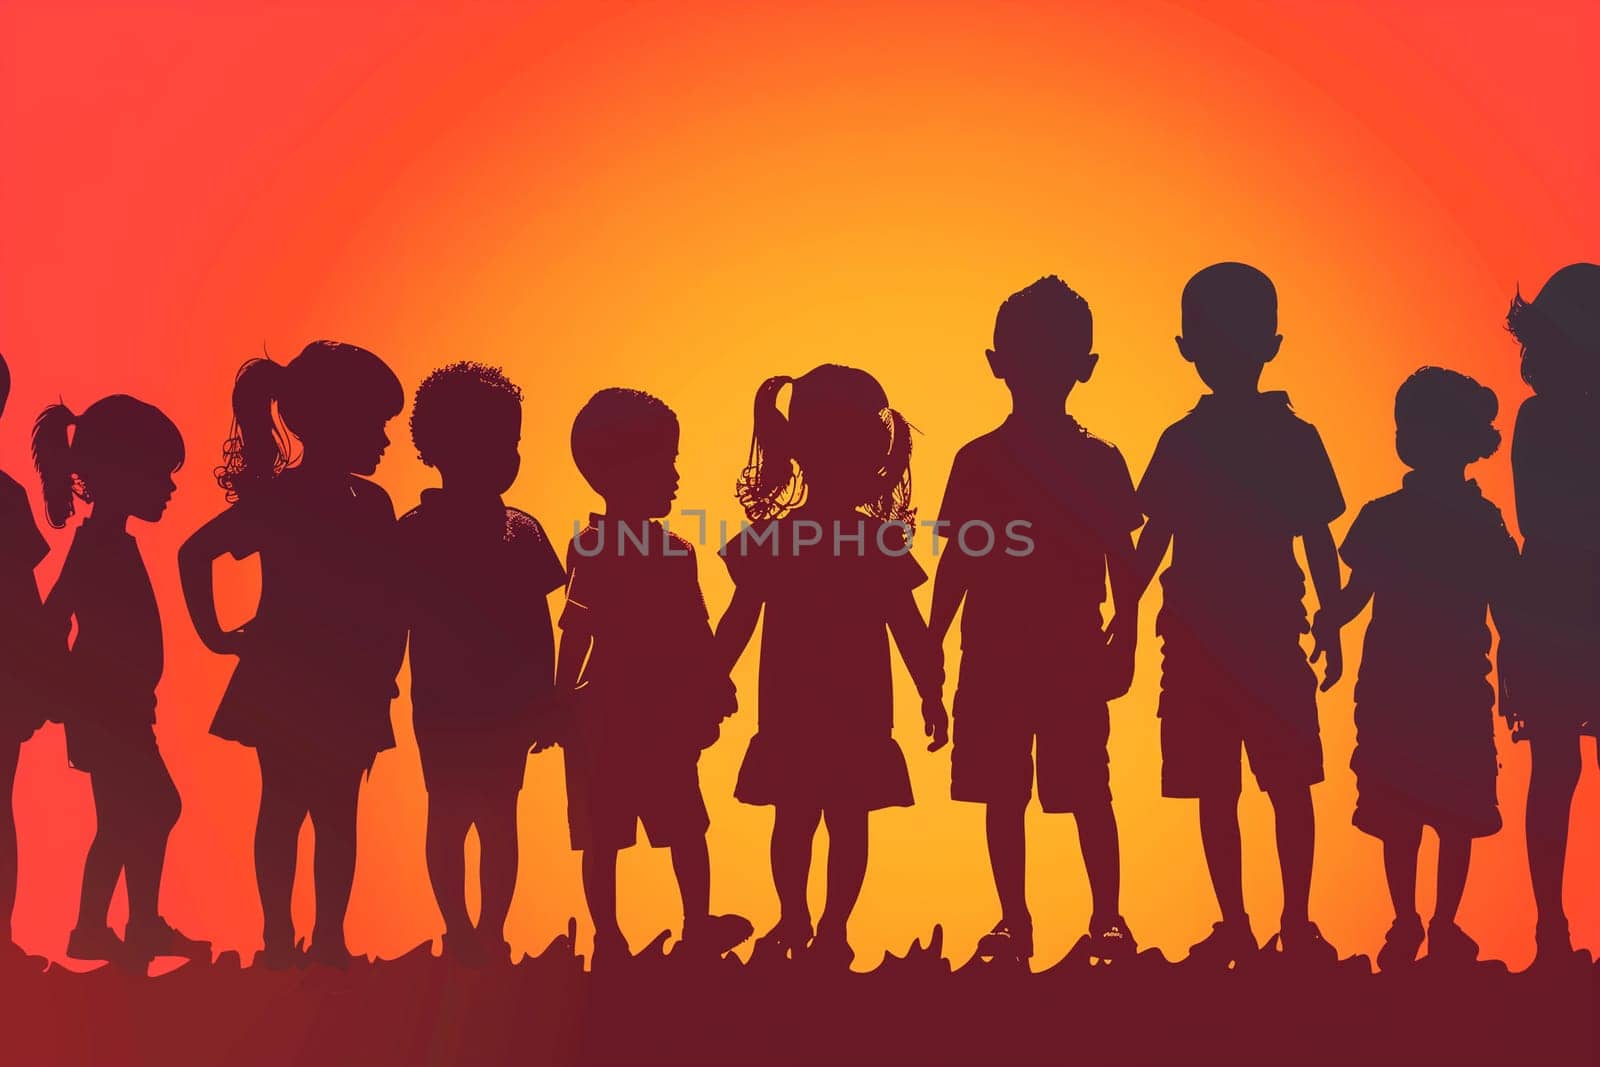 Children Holding Hands in Front of Orange Sunset by Sd28DimoN_1976